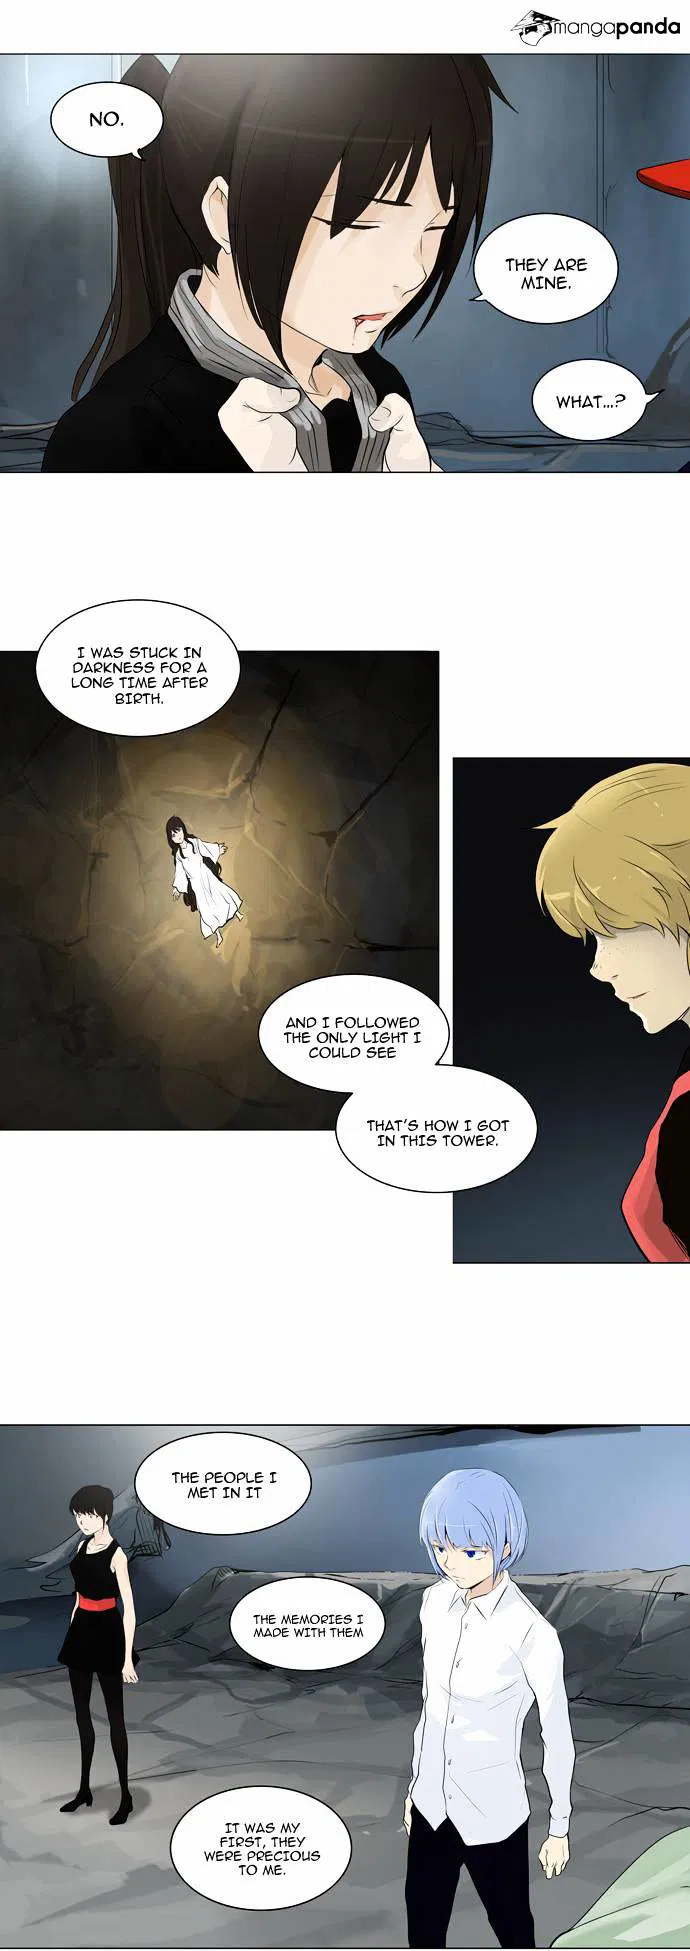 Tower of God Chapter 176 page 9